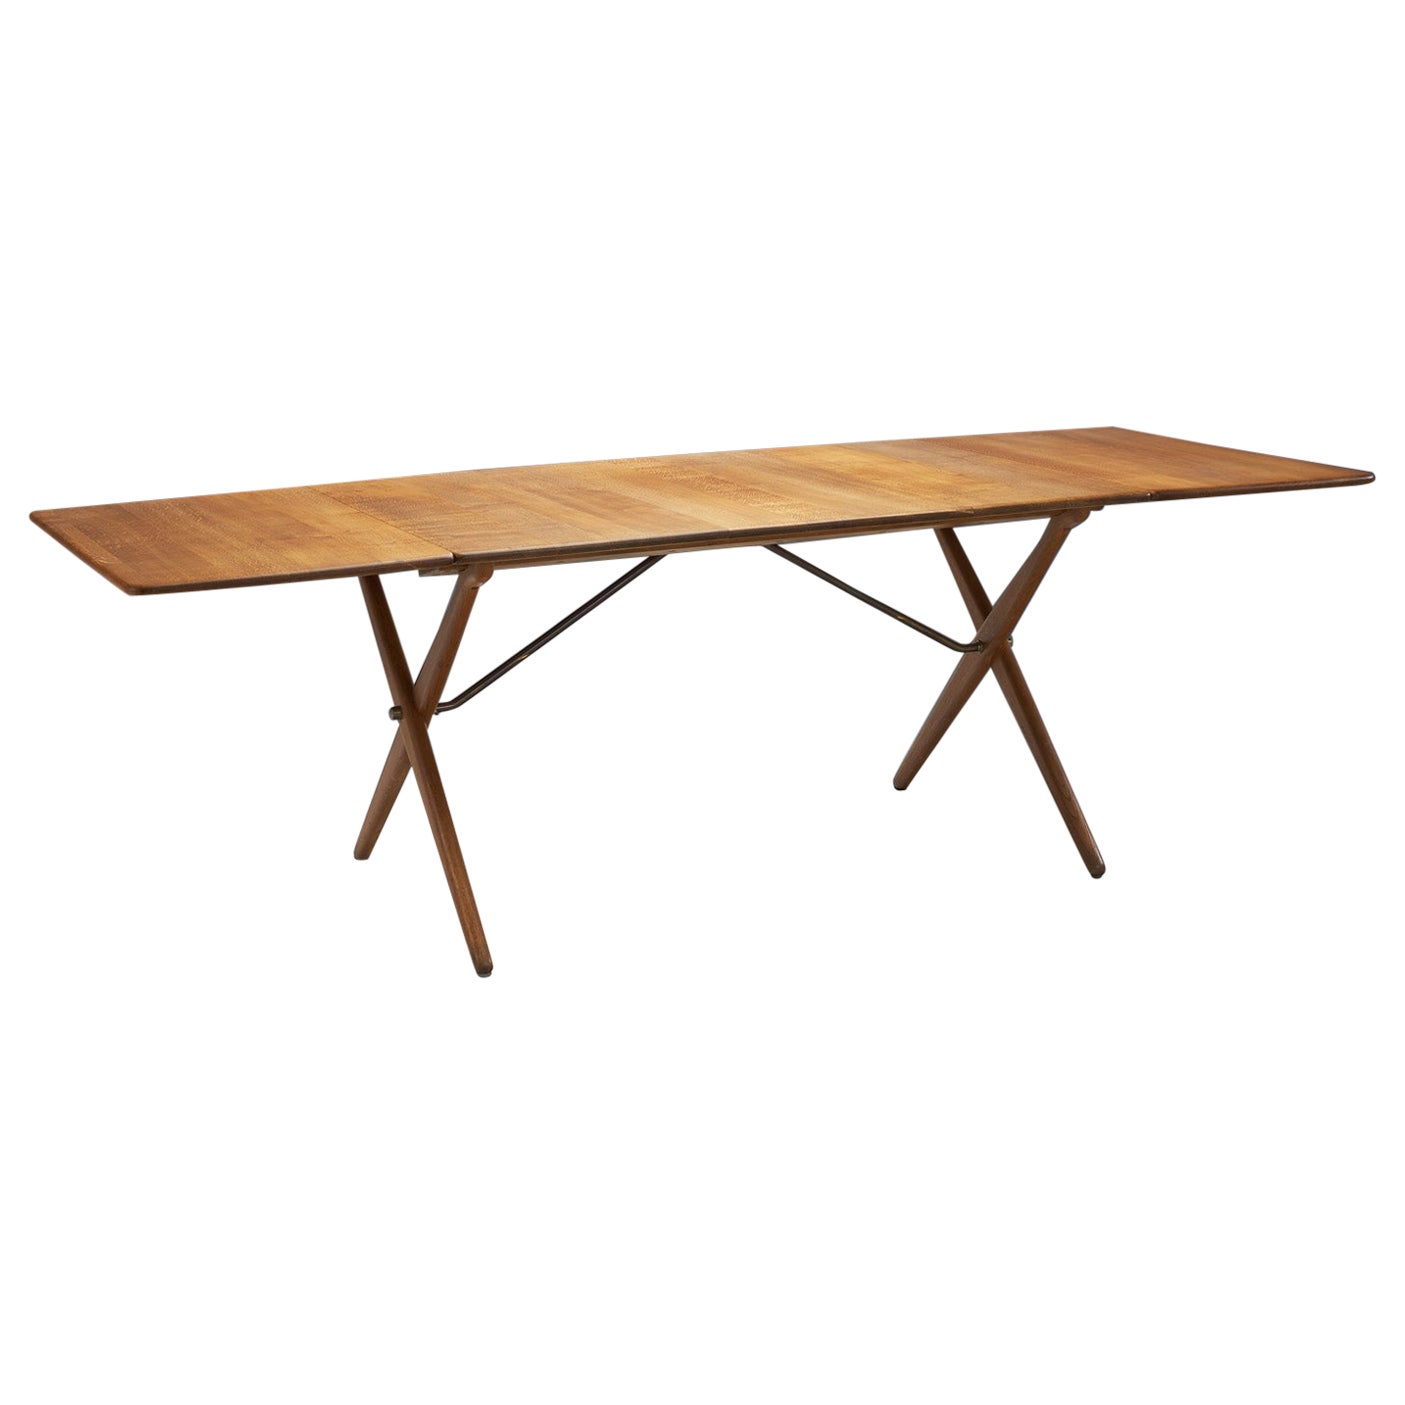 Hans Wegner "AT-309" Drop-Leaf Dining Table for Andreas Tuck, Denmark 1950s For Sale